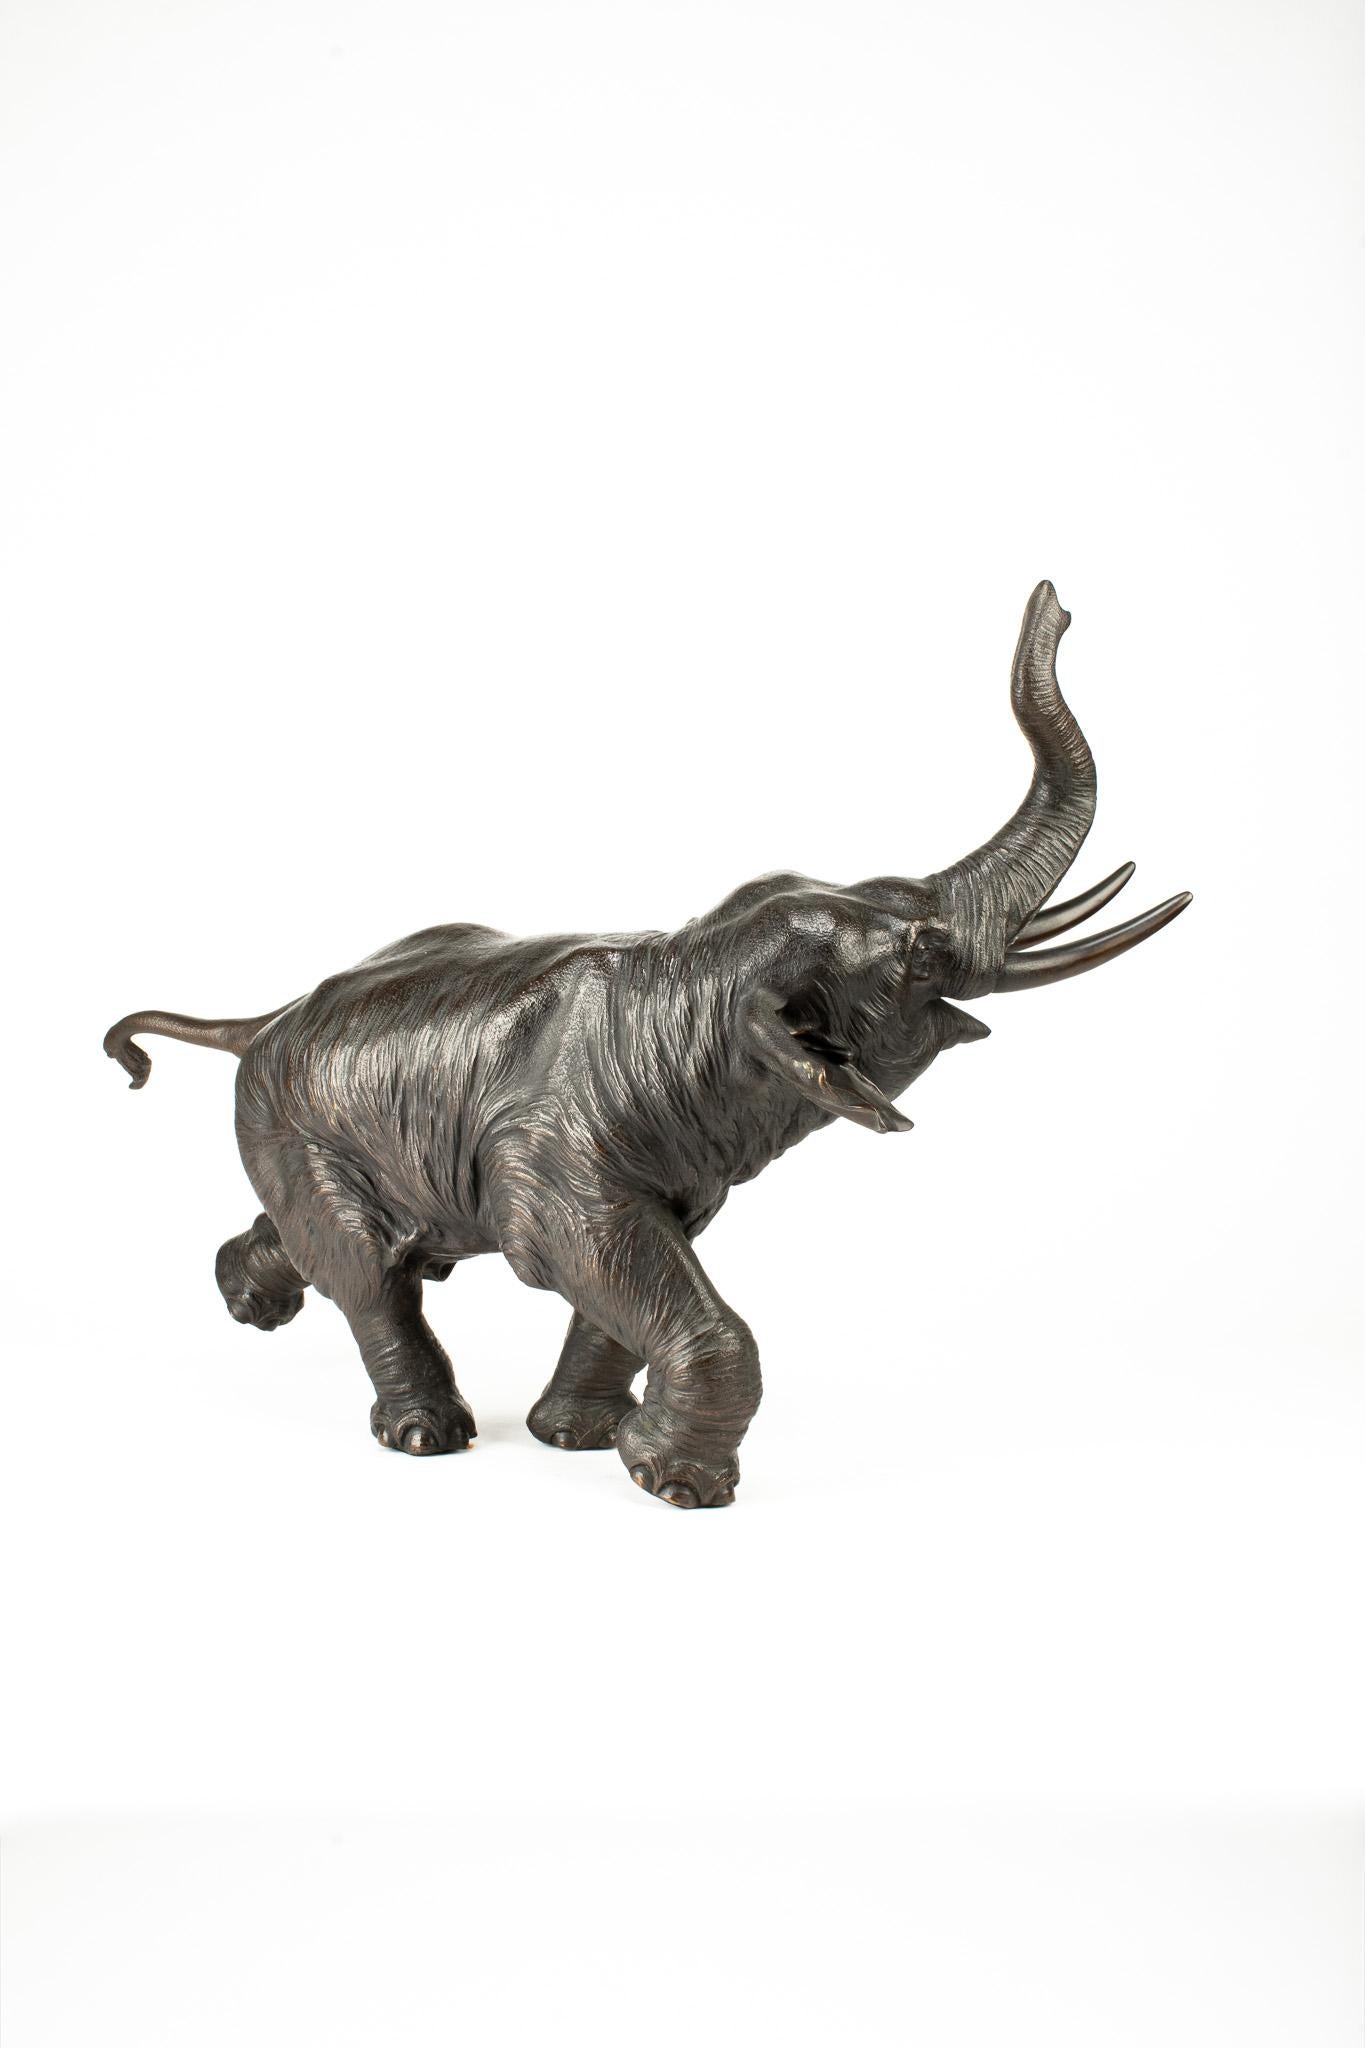 A Japanese bronze sculpture depicting a running elephant with its raised trunk 2